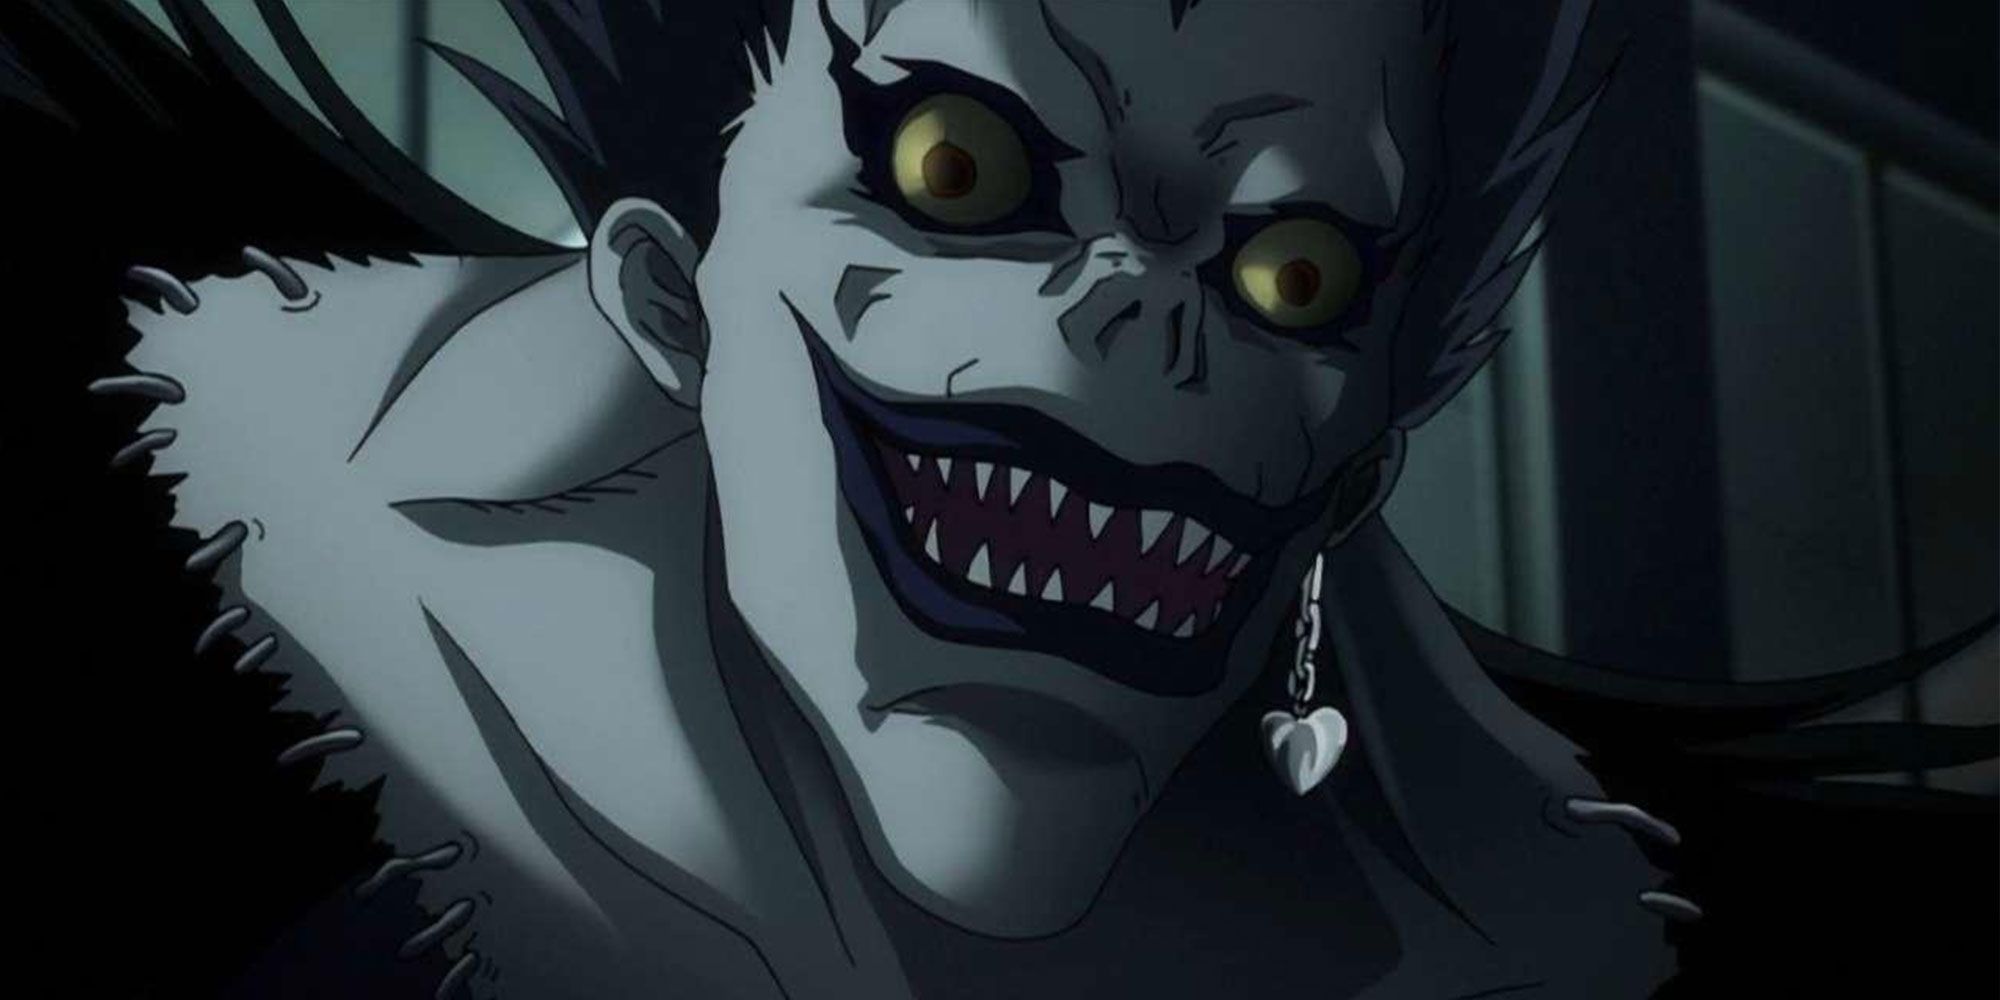 Ryuk smiling in the Death Note anime.